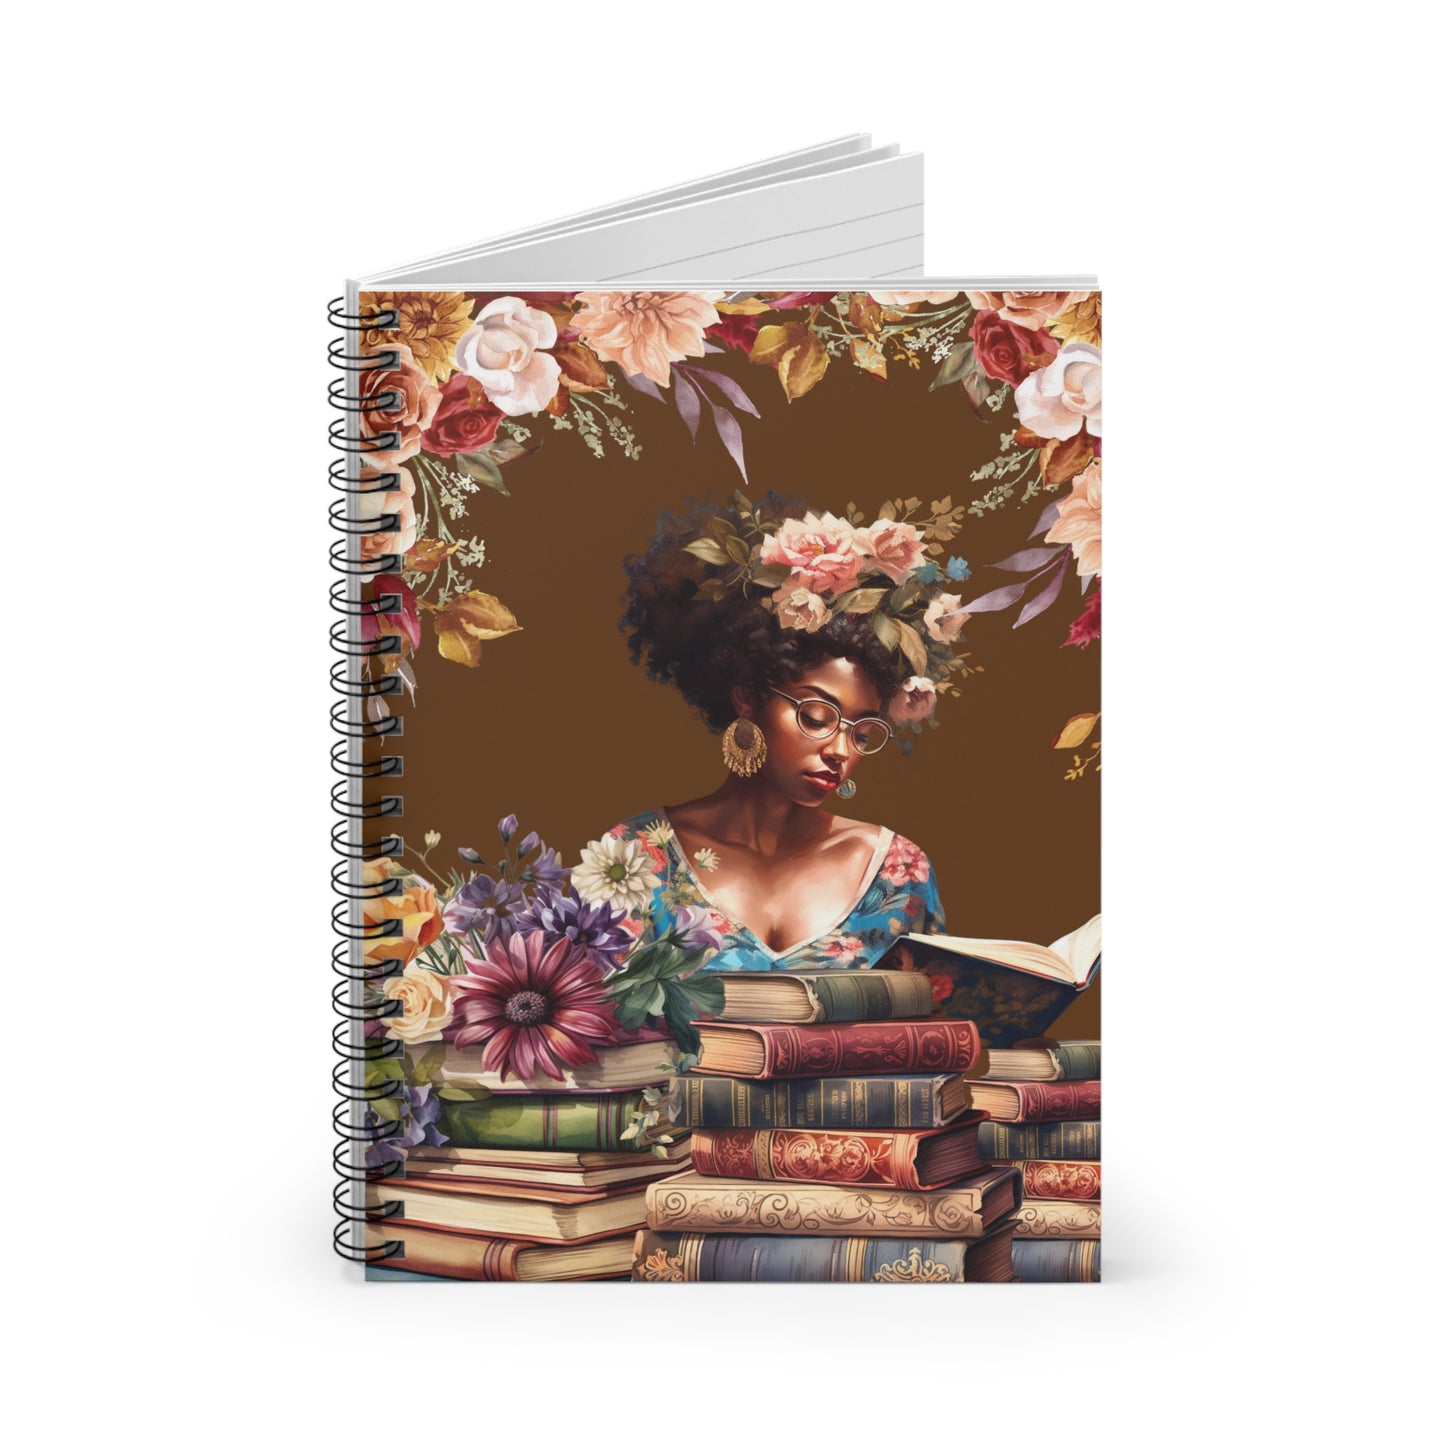 Introspective: Spiral Notebook - Log Books - Journals - Diaries - and More Custom Printed by TheGlassyLass